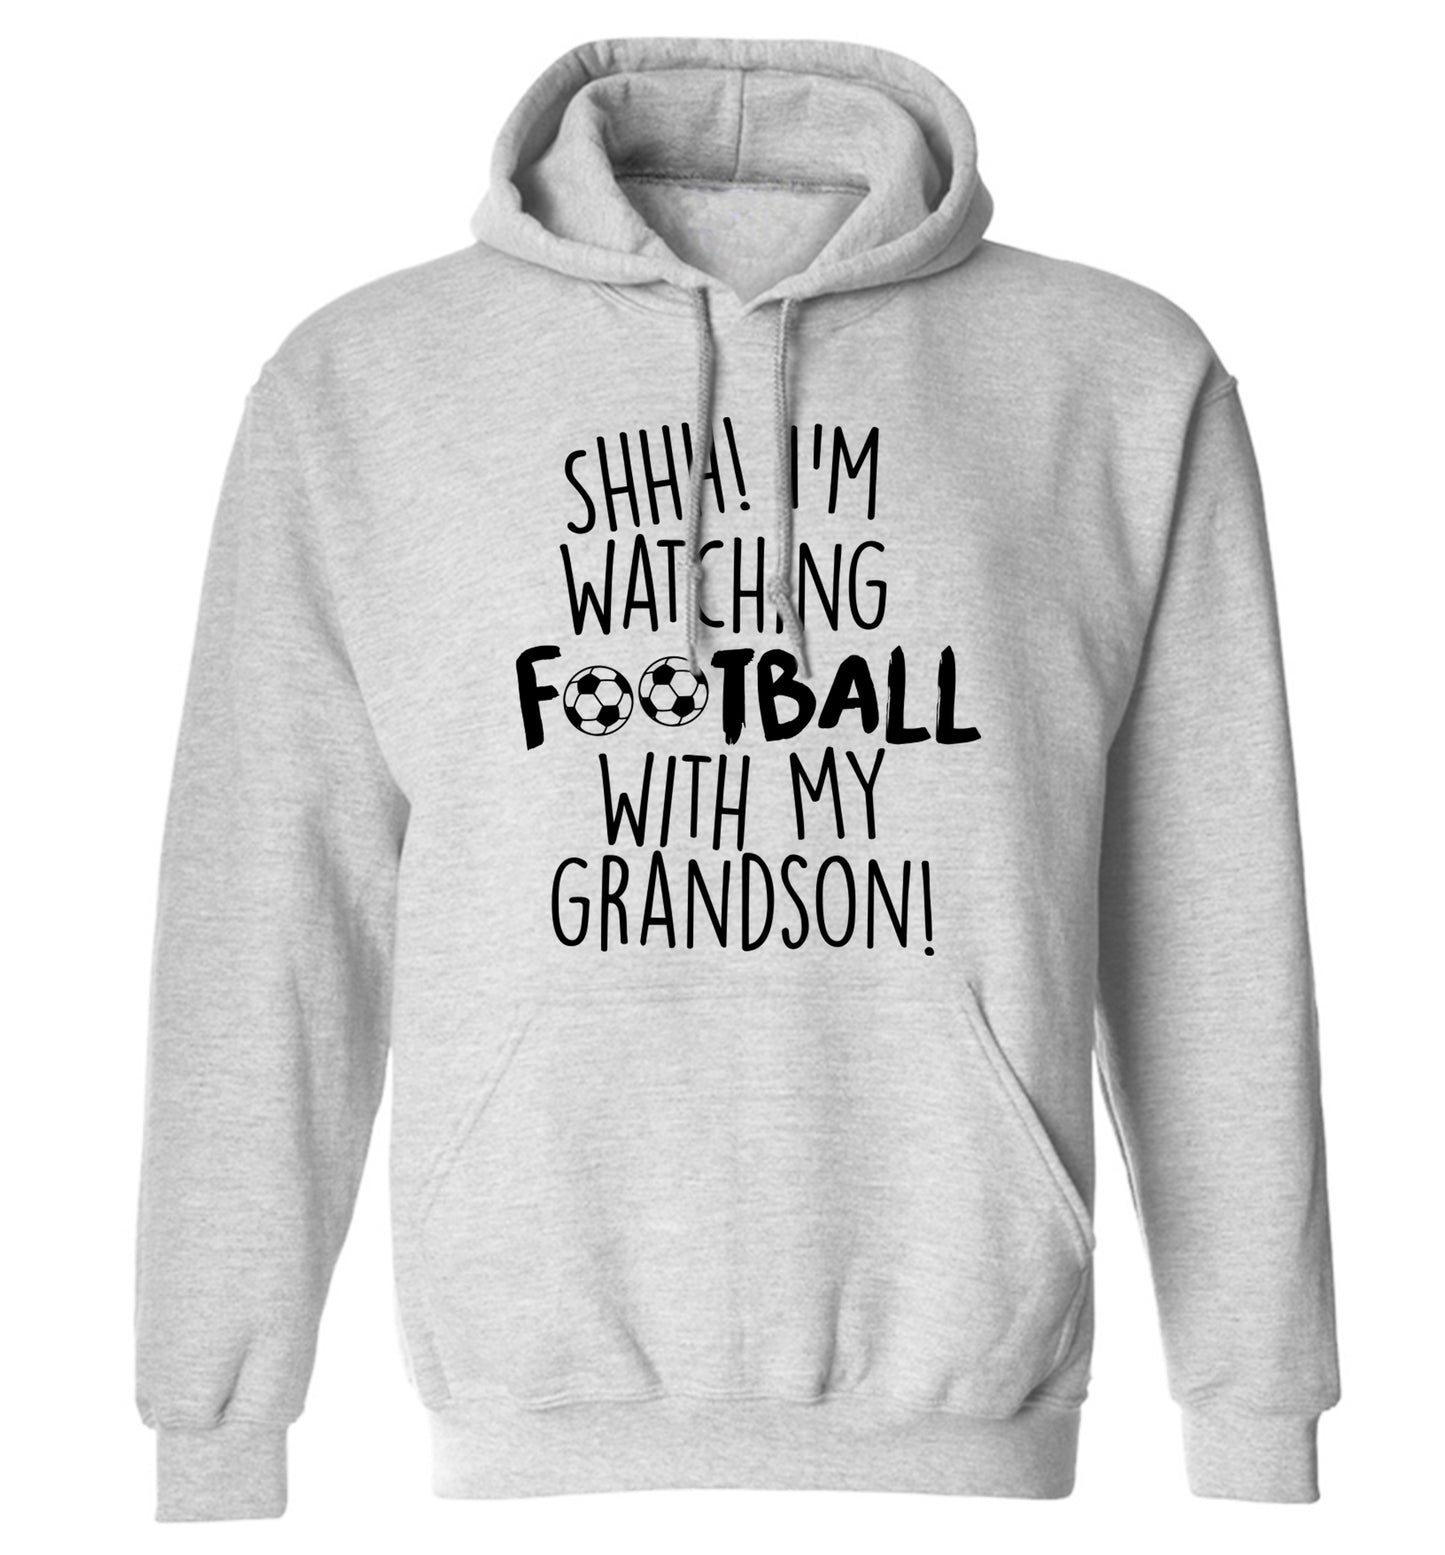 Shhh I'm watching football with my grandson adults unisexgrey hoodie 2XL